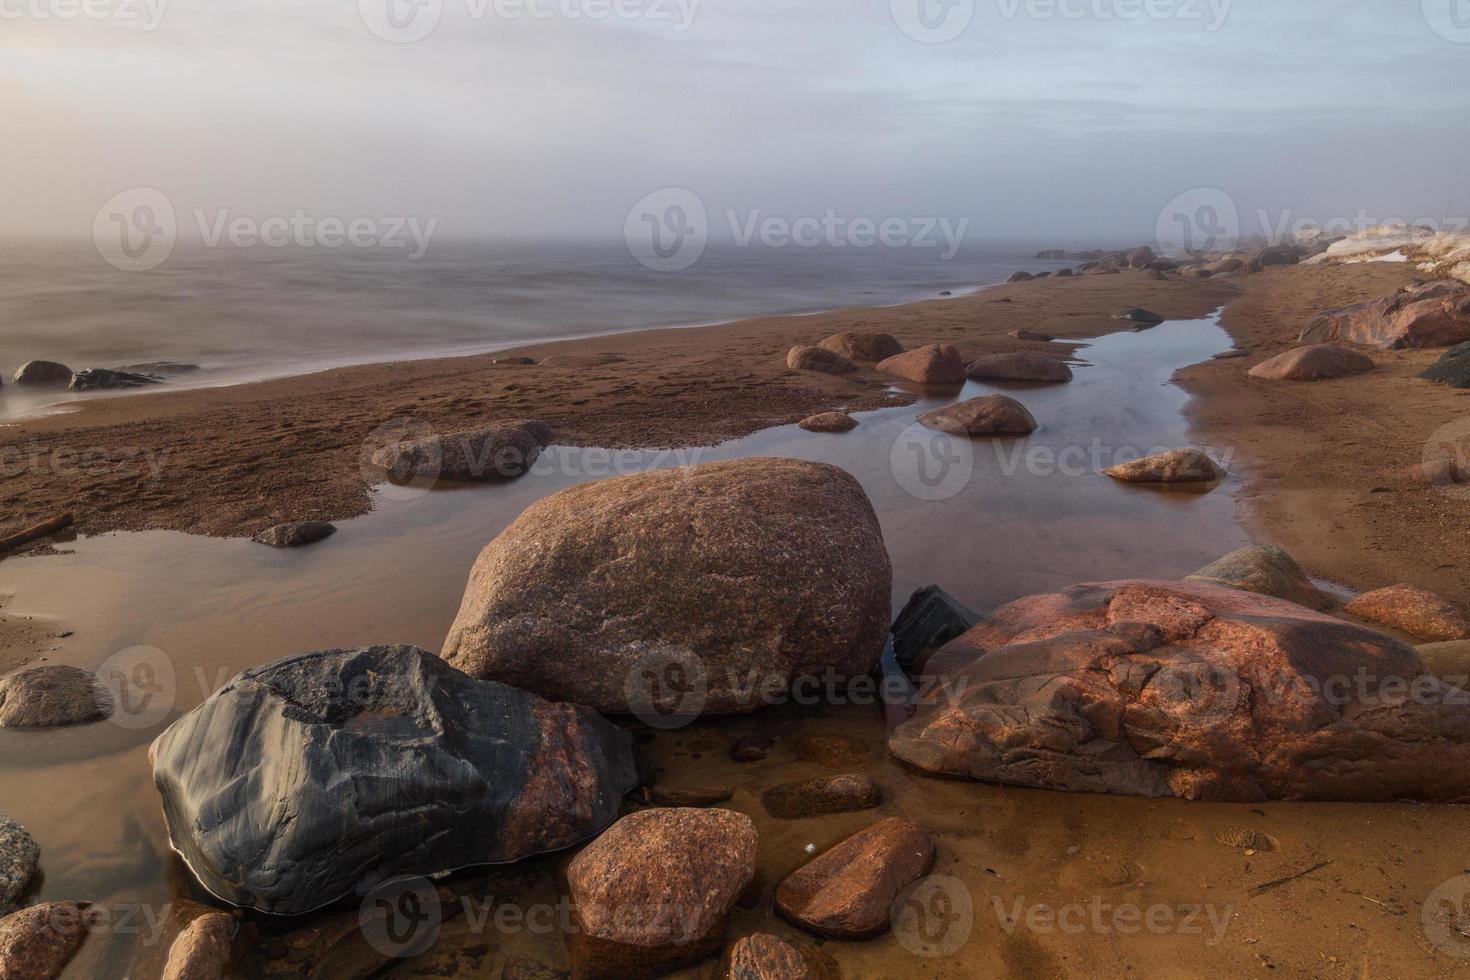 Stones on The Coast of the Baltic Sea at Sunset photo